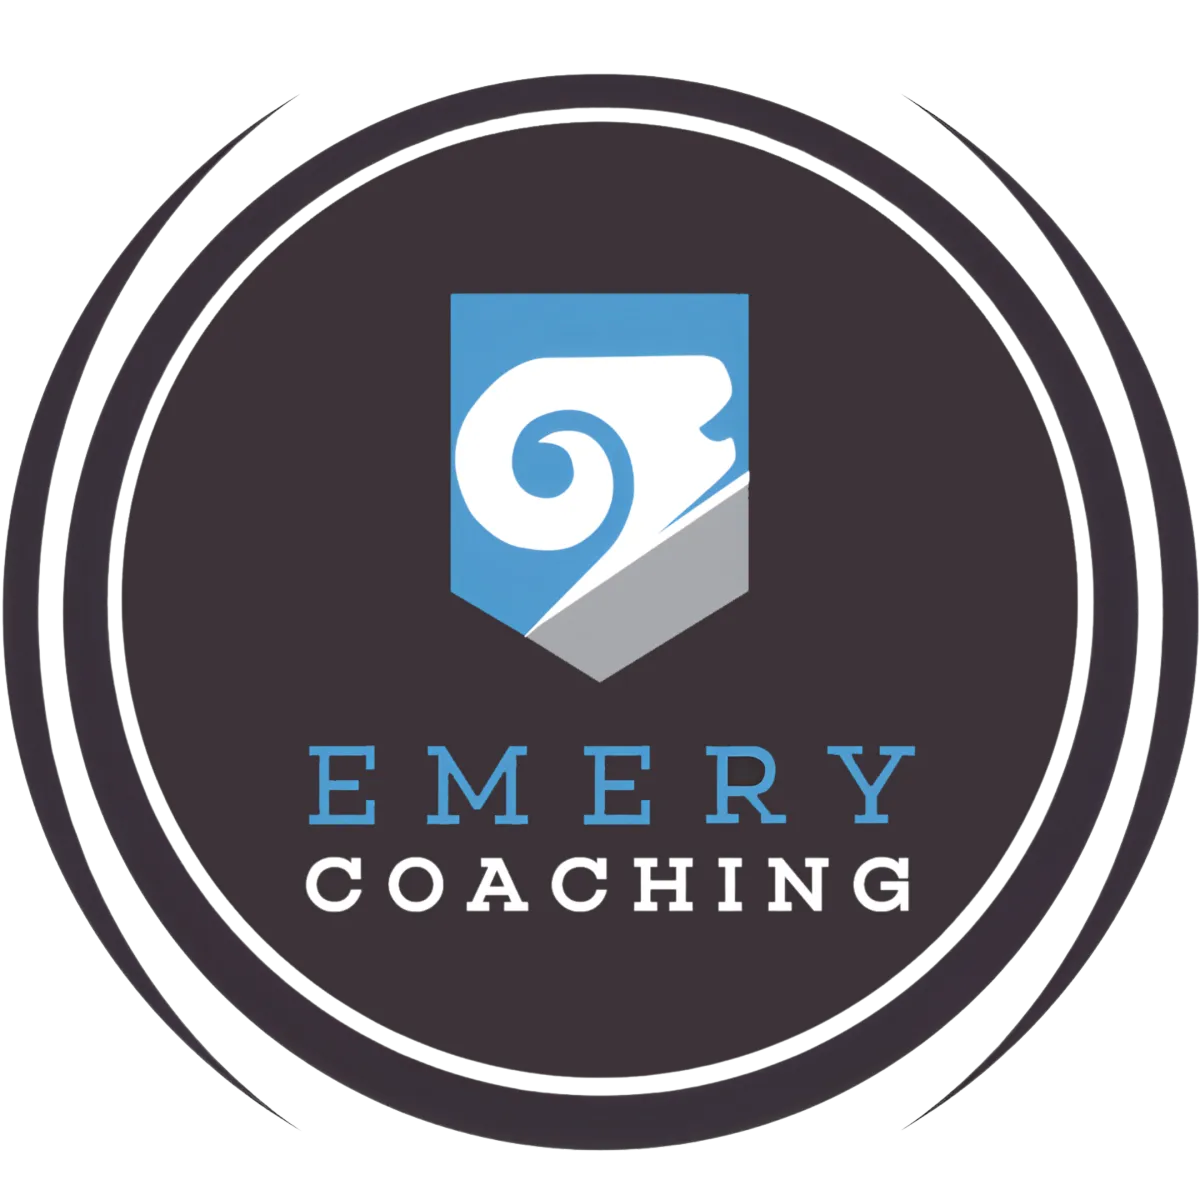 TThe Emery Coaching logo encapsulates the essence of transformation and leadership. It reflects the name, Emery, symbolizing an industrious leader and a hard, abrasive stone, mirroring the coaching approach of being a supportive yet challenging force towards greatness. The logo honors the founder's educational background with colors inspired by UNC's Carolina blue and incorporates the ram from UNC and VCU mascots, representing strength, leadership, fearlessness, and determination. These elements combined highlight the mission to forge powerful, healthy people.